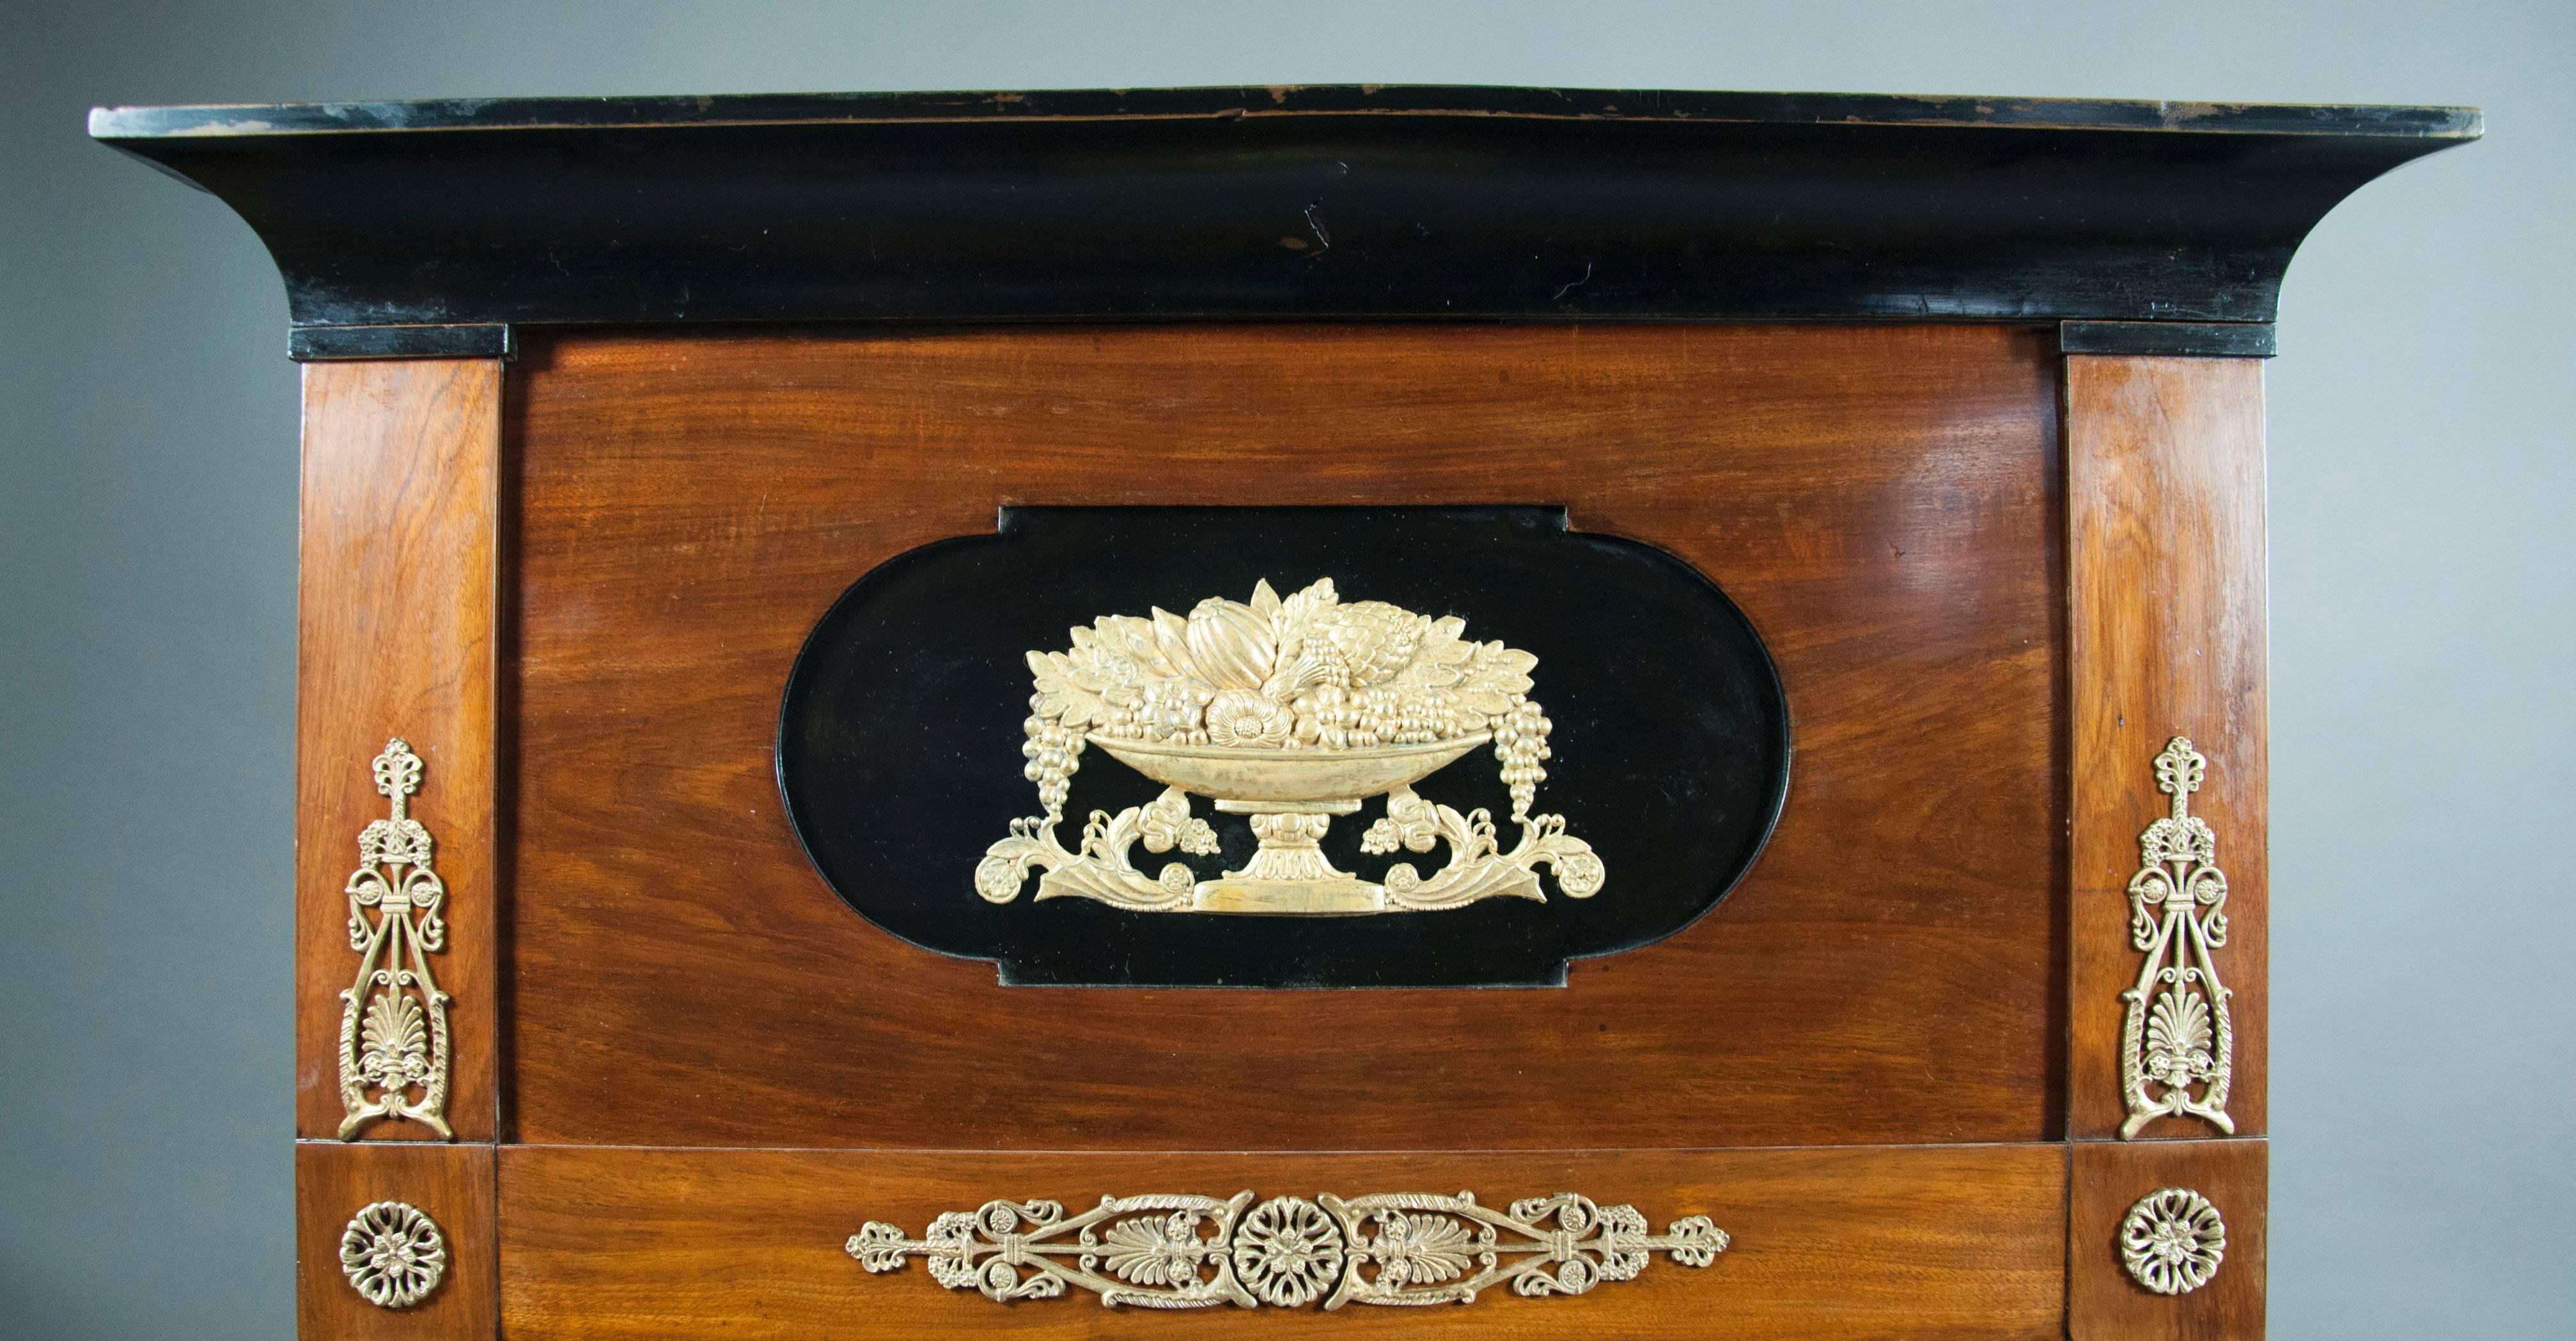 Rectangular with ebonized cornice over a panel with central cornucopia over a mirror plate with a conforming bronze mounted frame. Frame flanked with pair of candleholders.